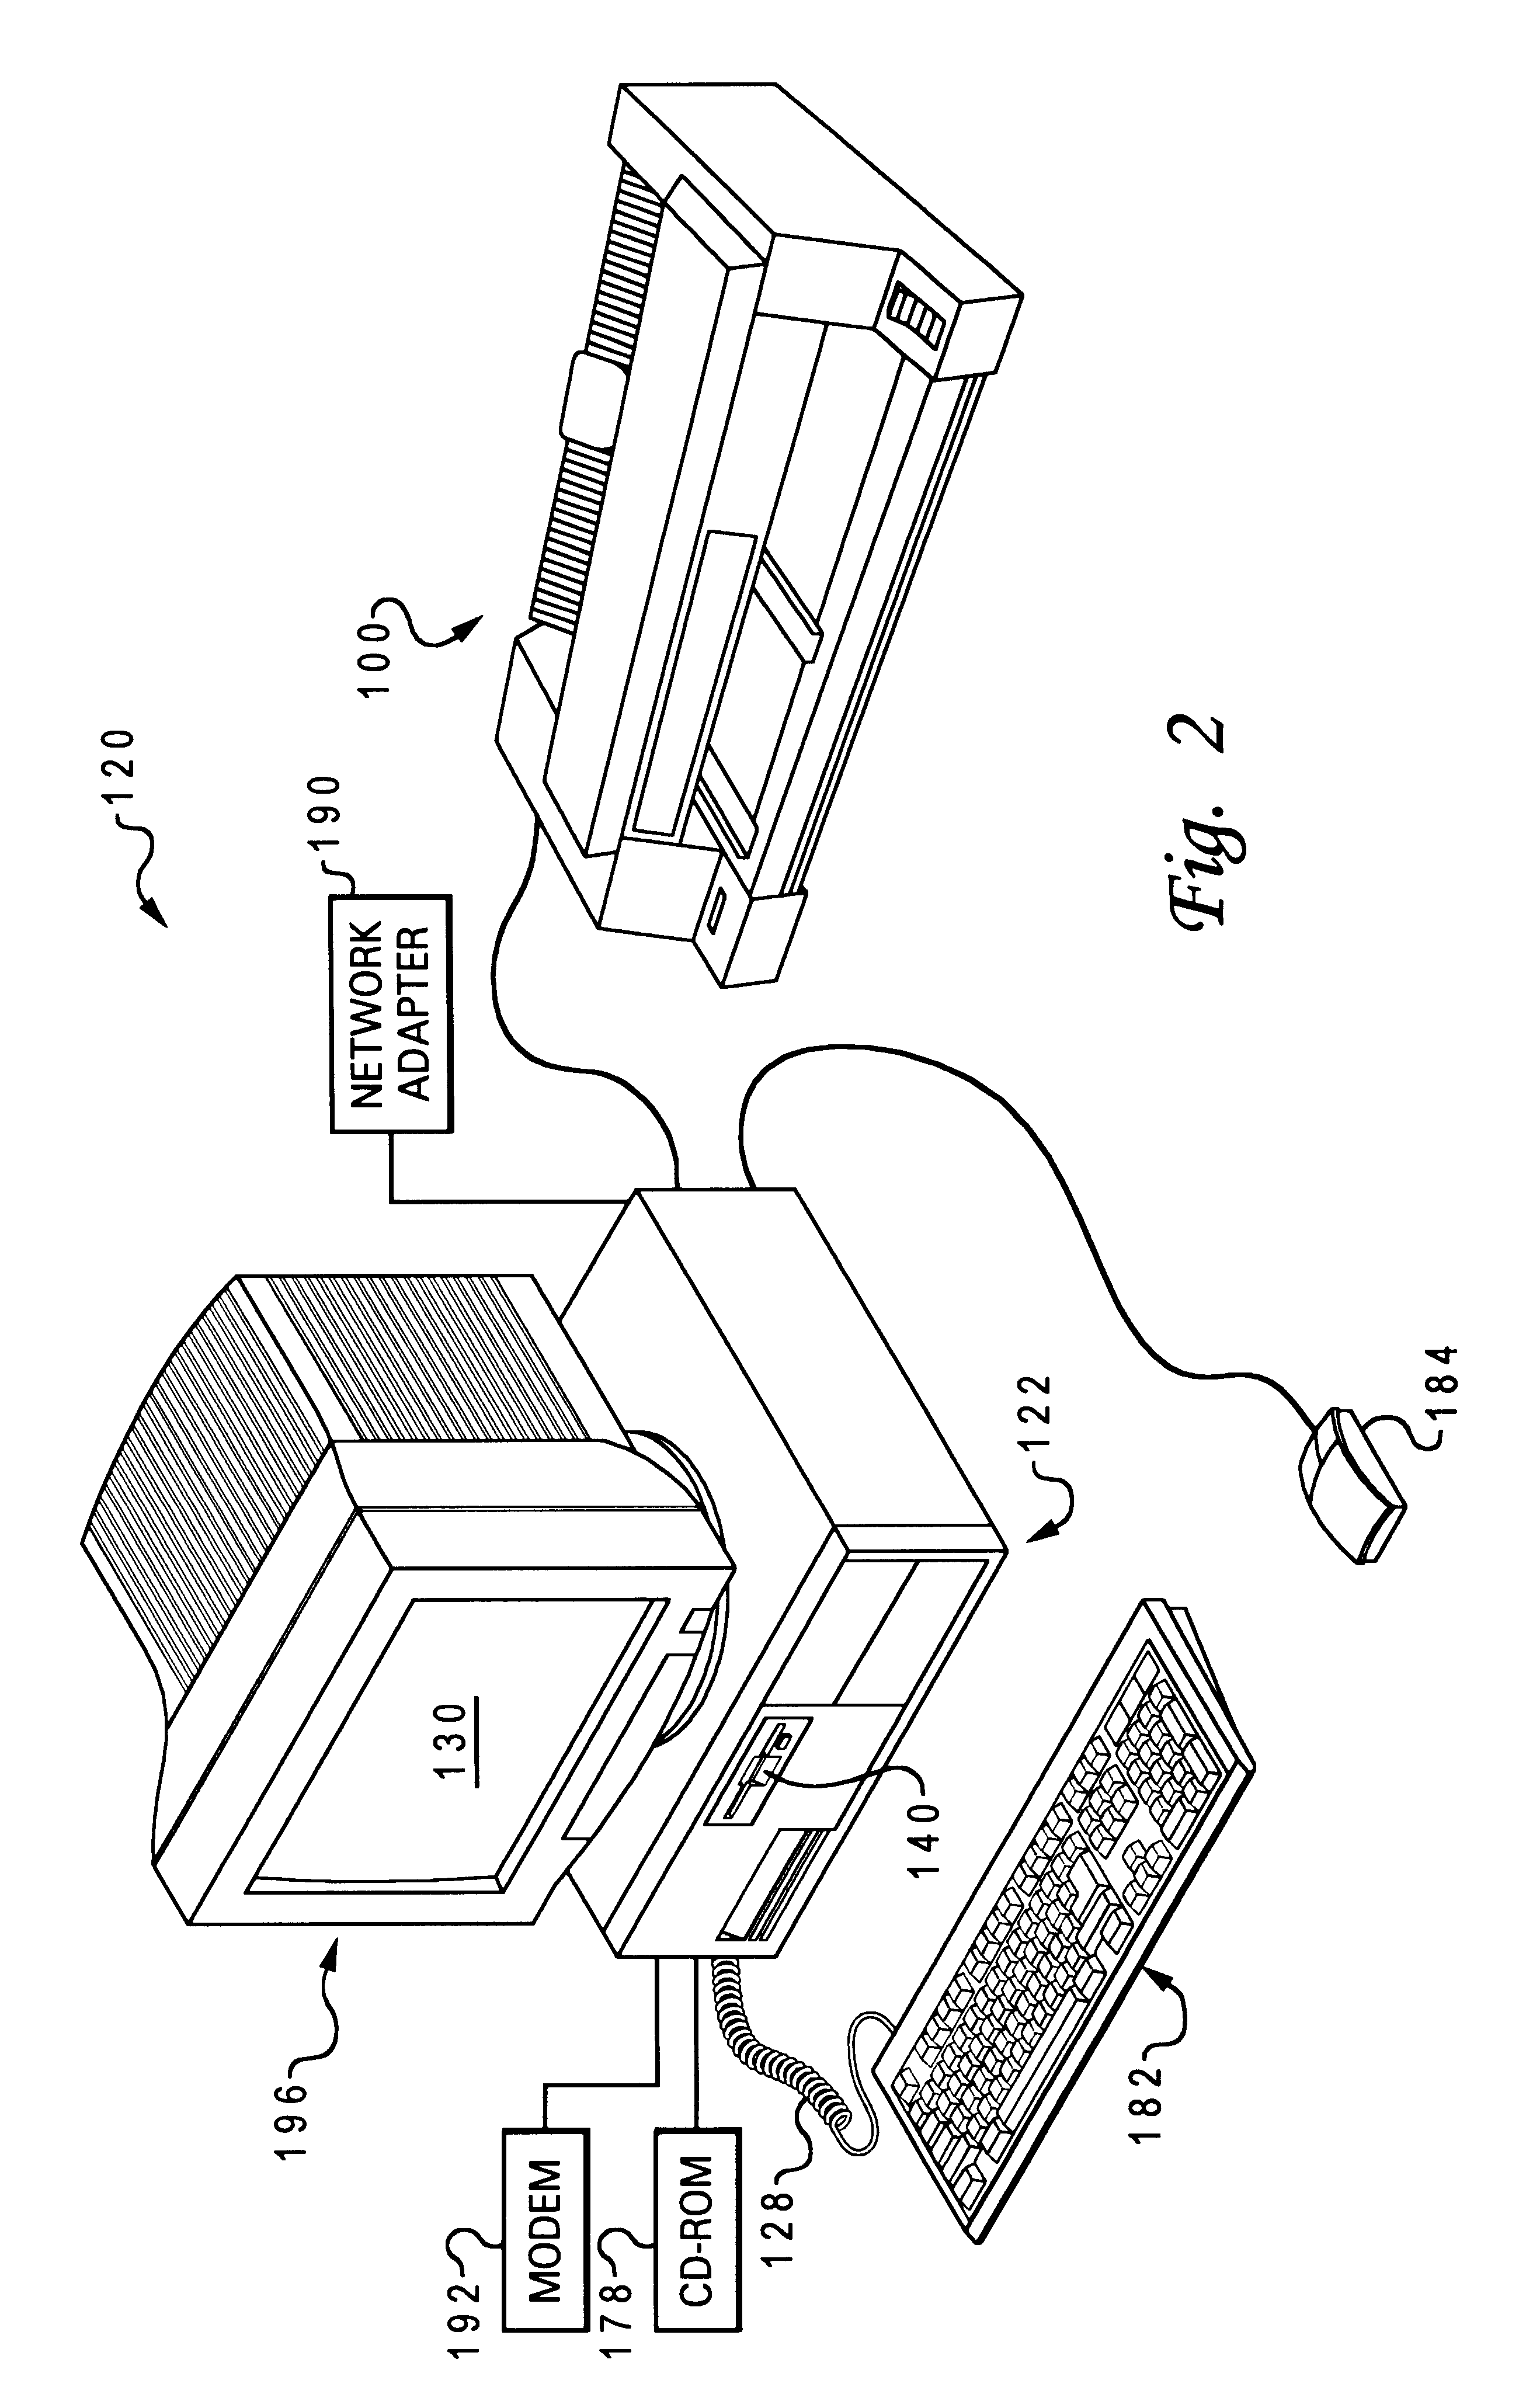 High performance load instruction management via system bus with explicit register load and/or cache reload protocols